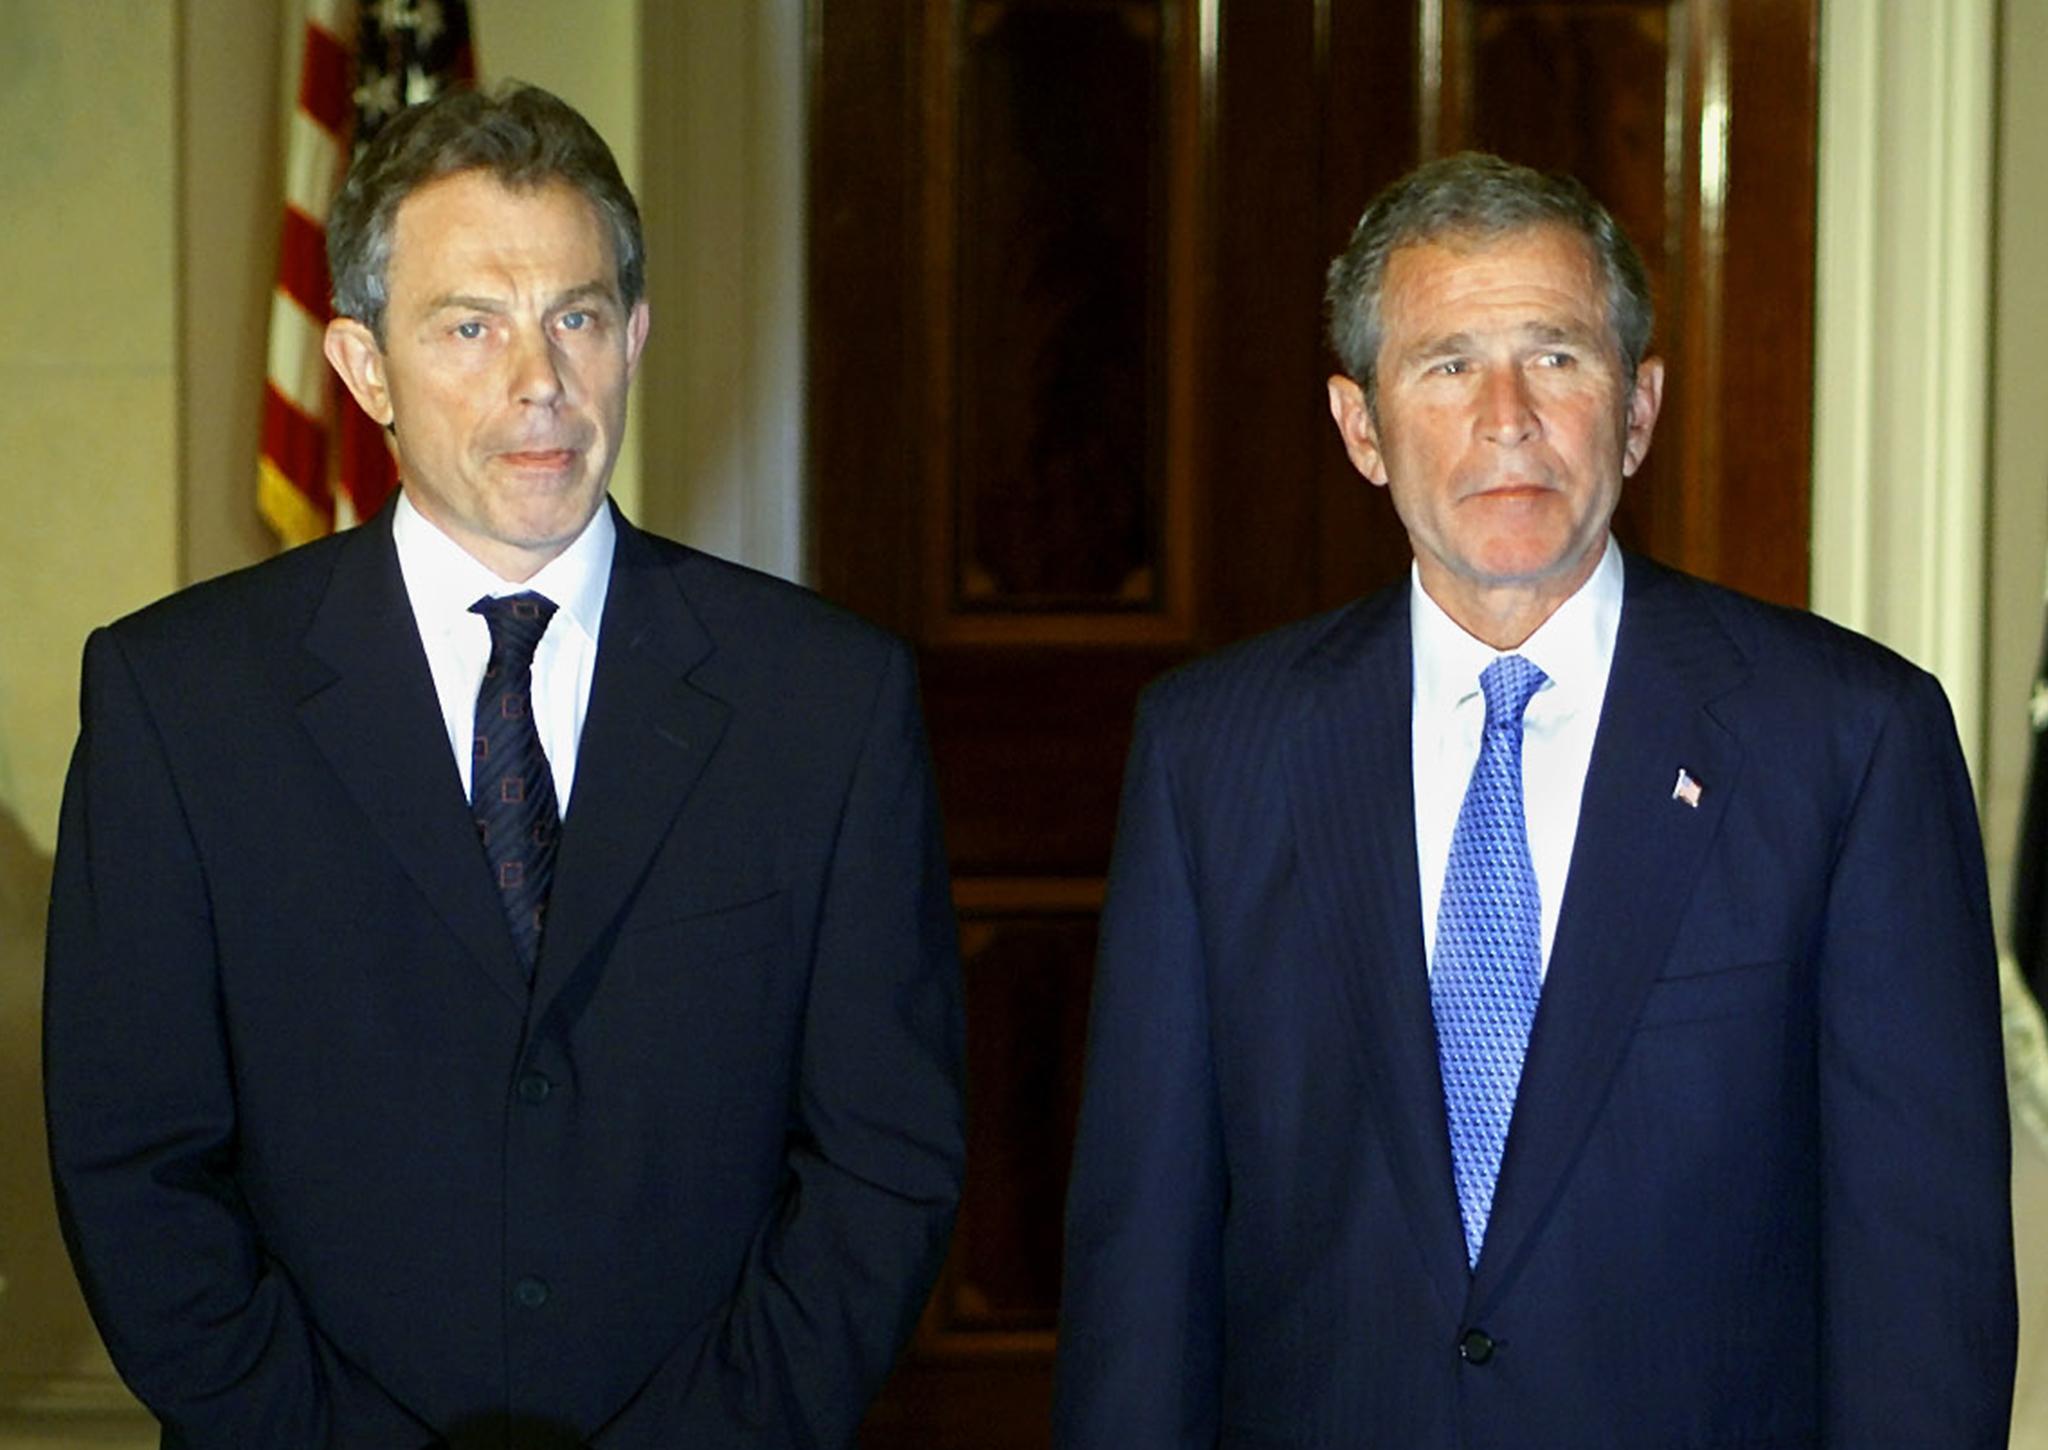 Tony Blair and US President George W Bush listen to questions from the US and British press as they meet at the White House late 20 September 2001